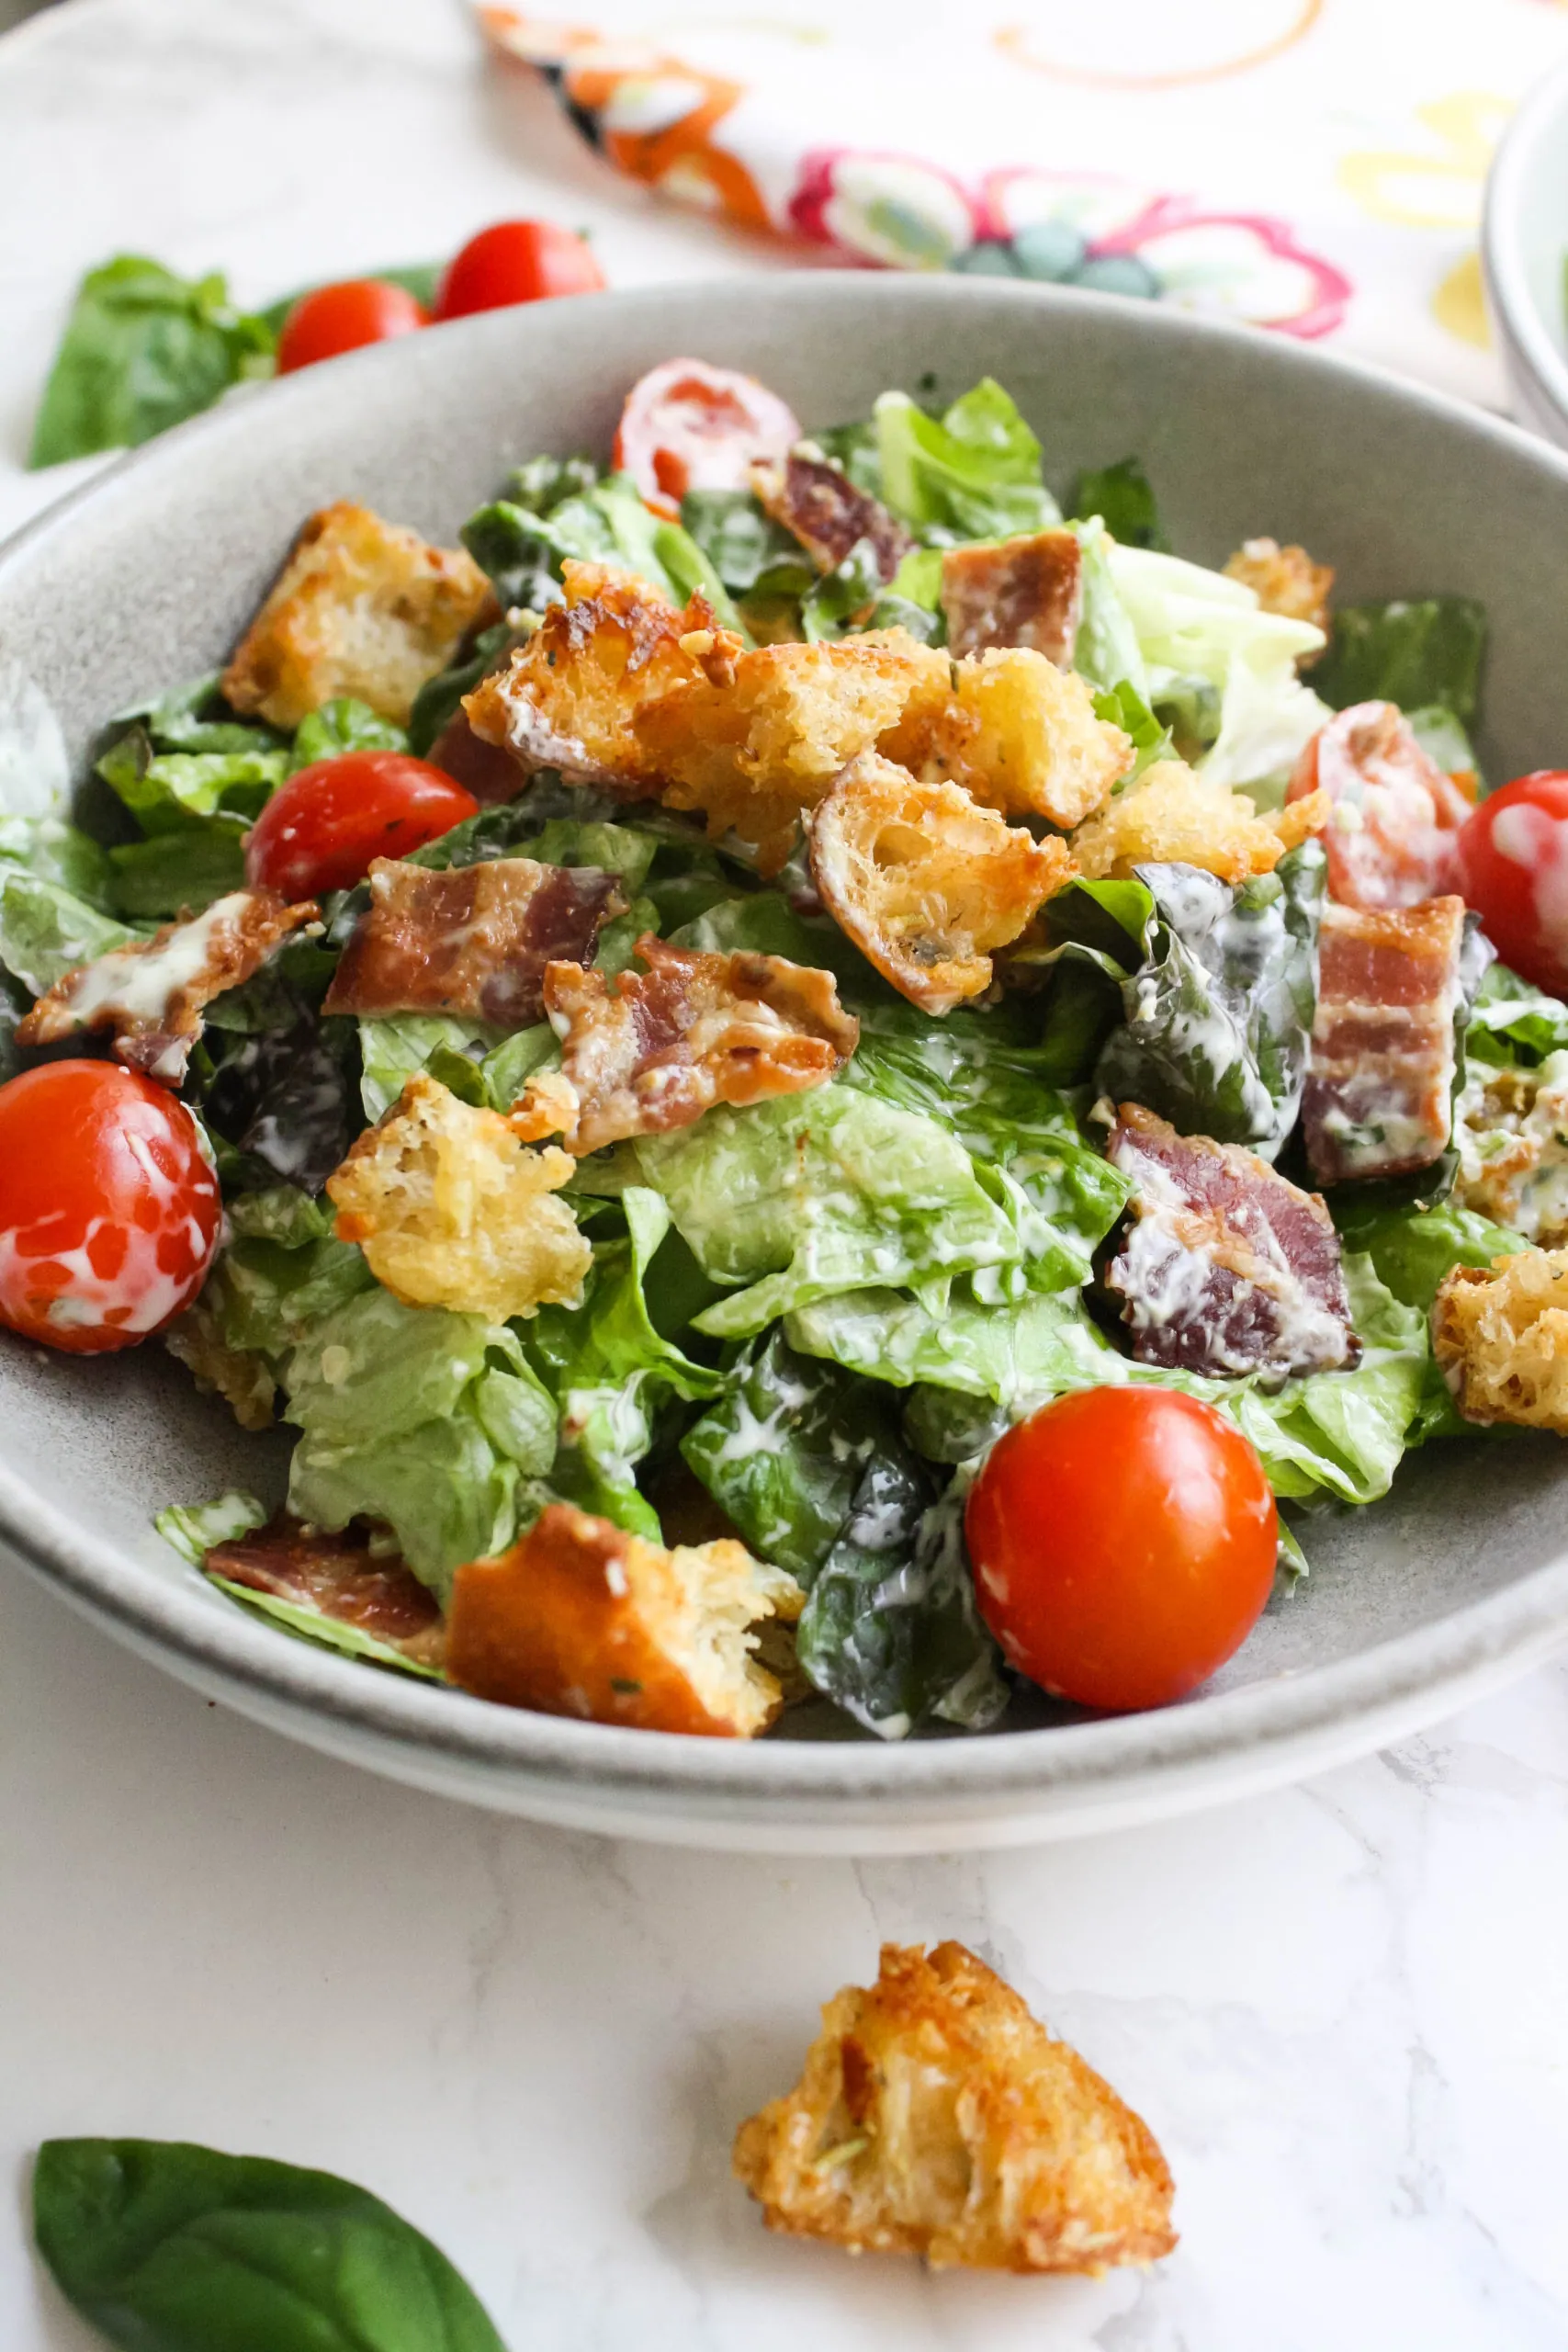 You'll love this BLT Salad with Garlic-Basil Dressing for a fabulous meal!